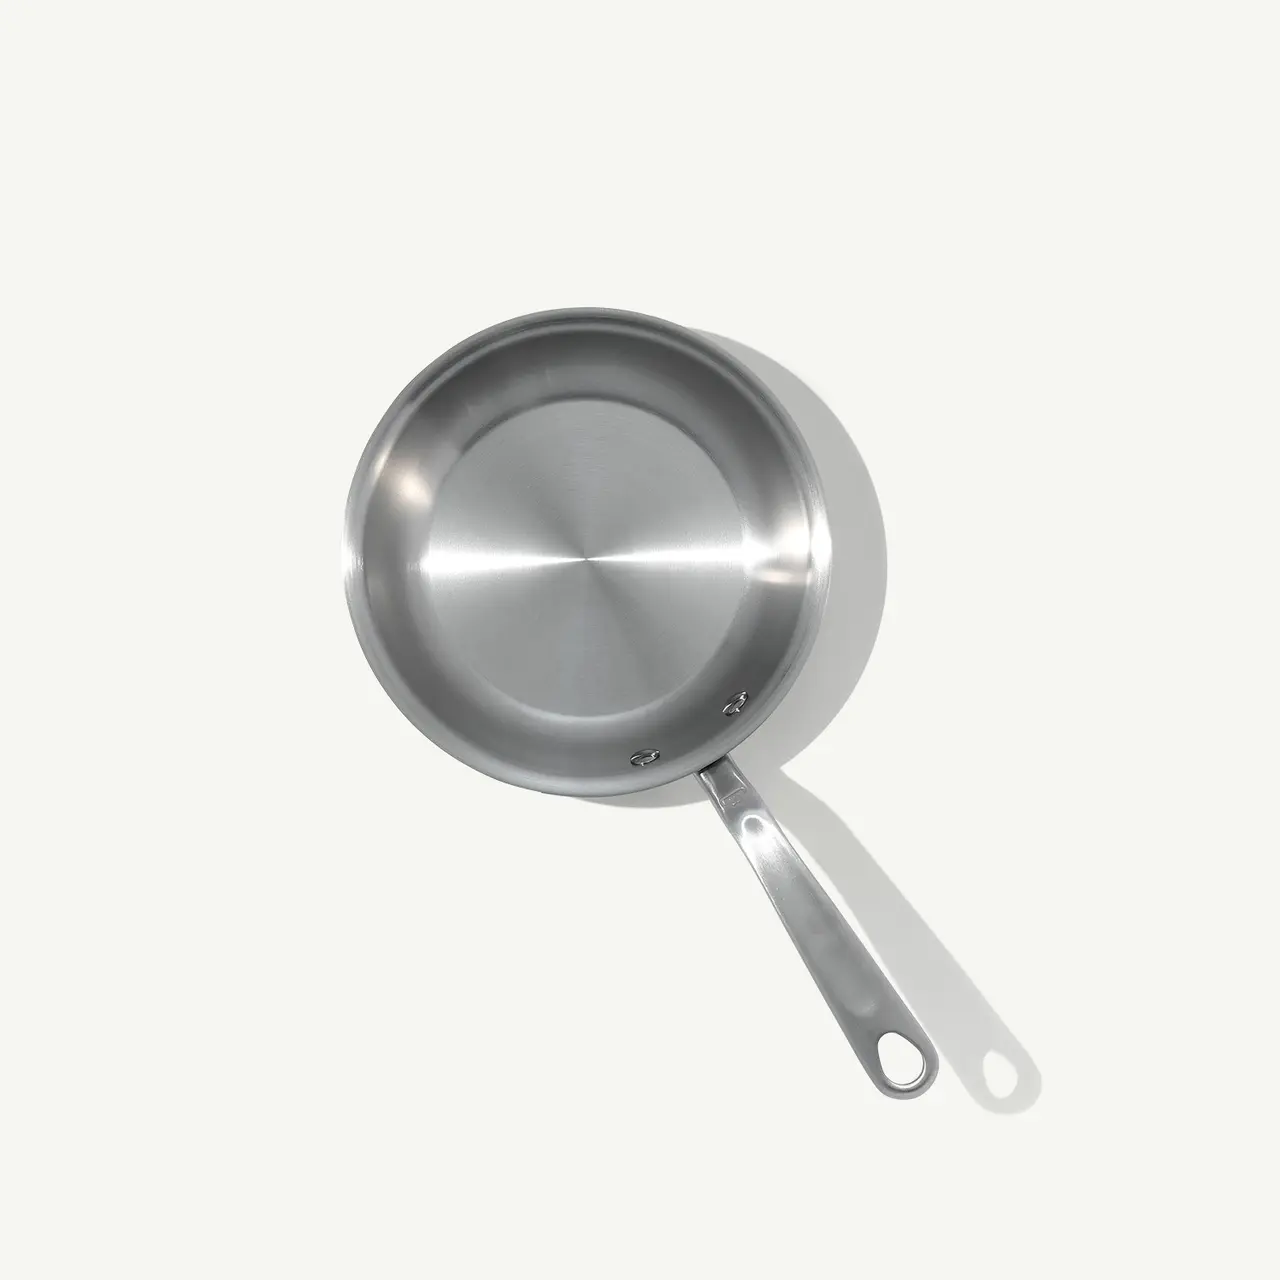 A stainless steel frying pan with a long handle is displayed against a light grey background.